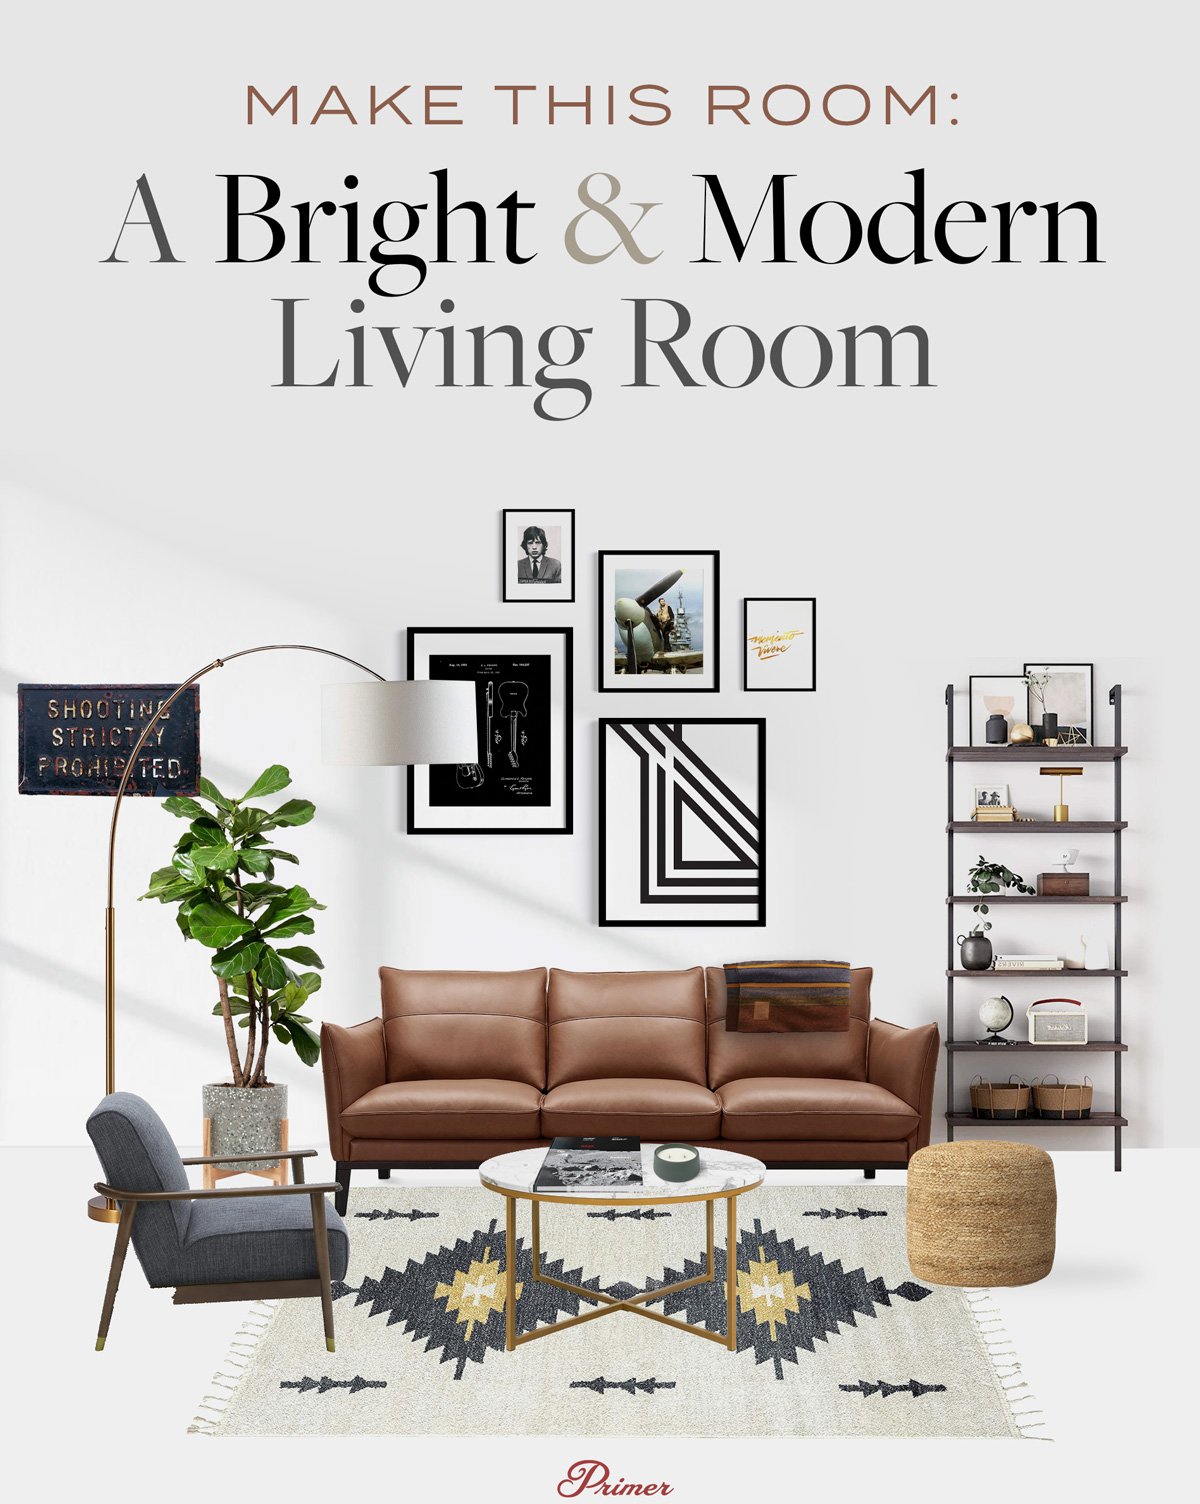 make this room: a bright & modern living room inspiration